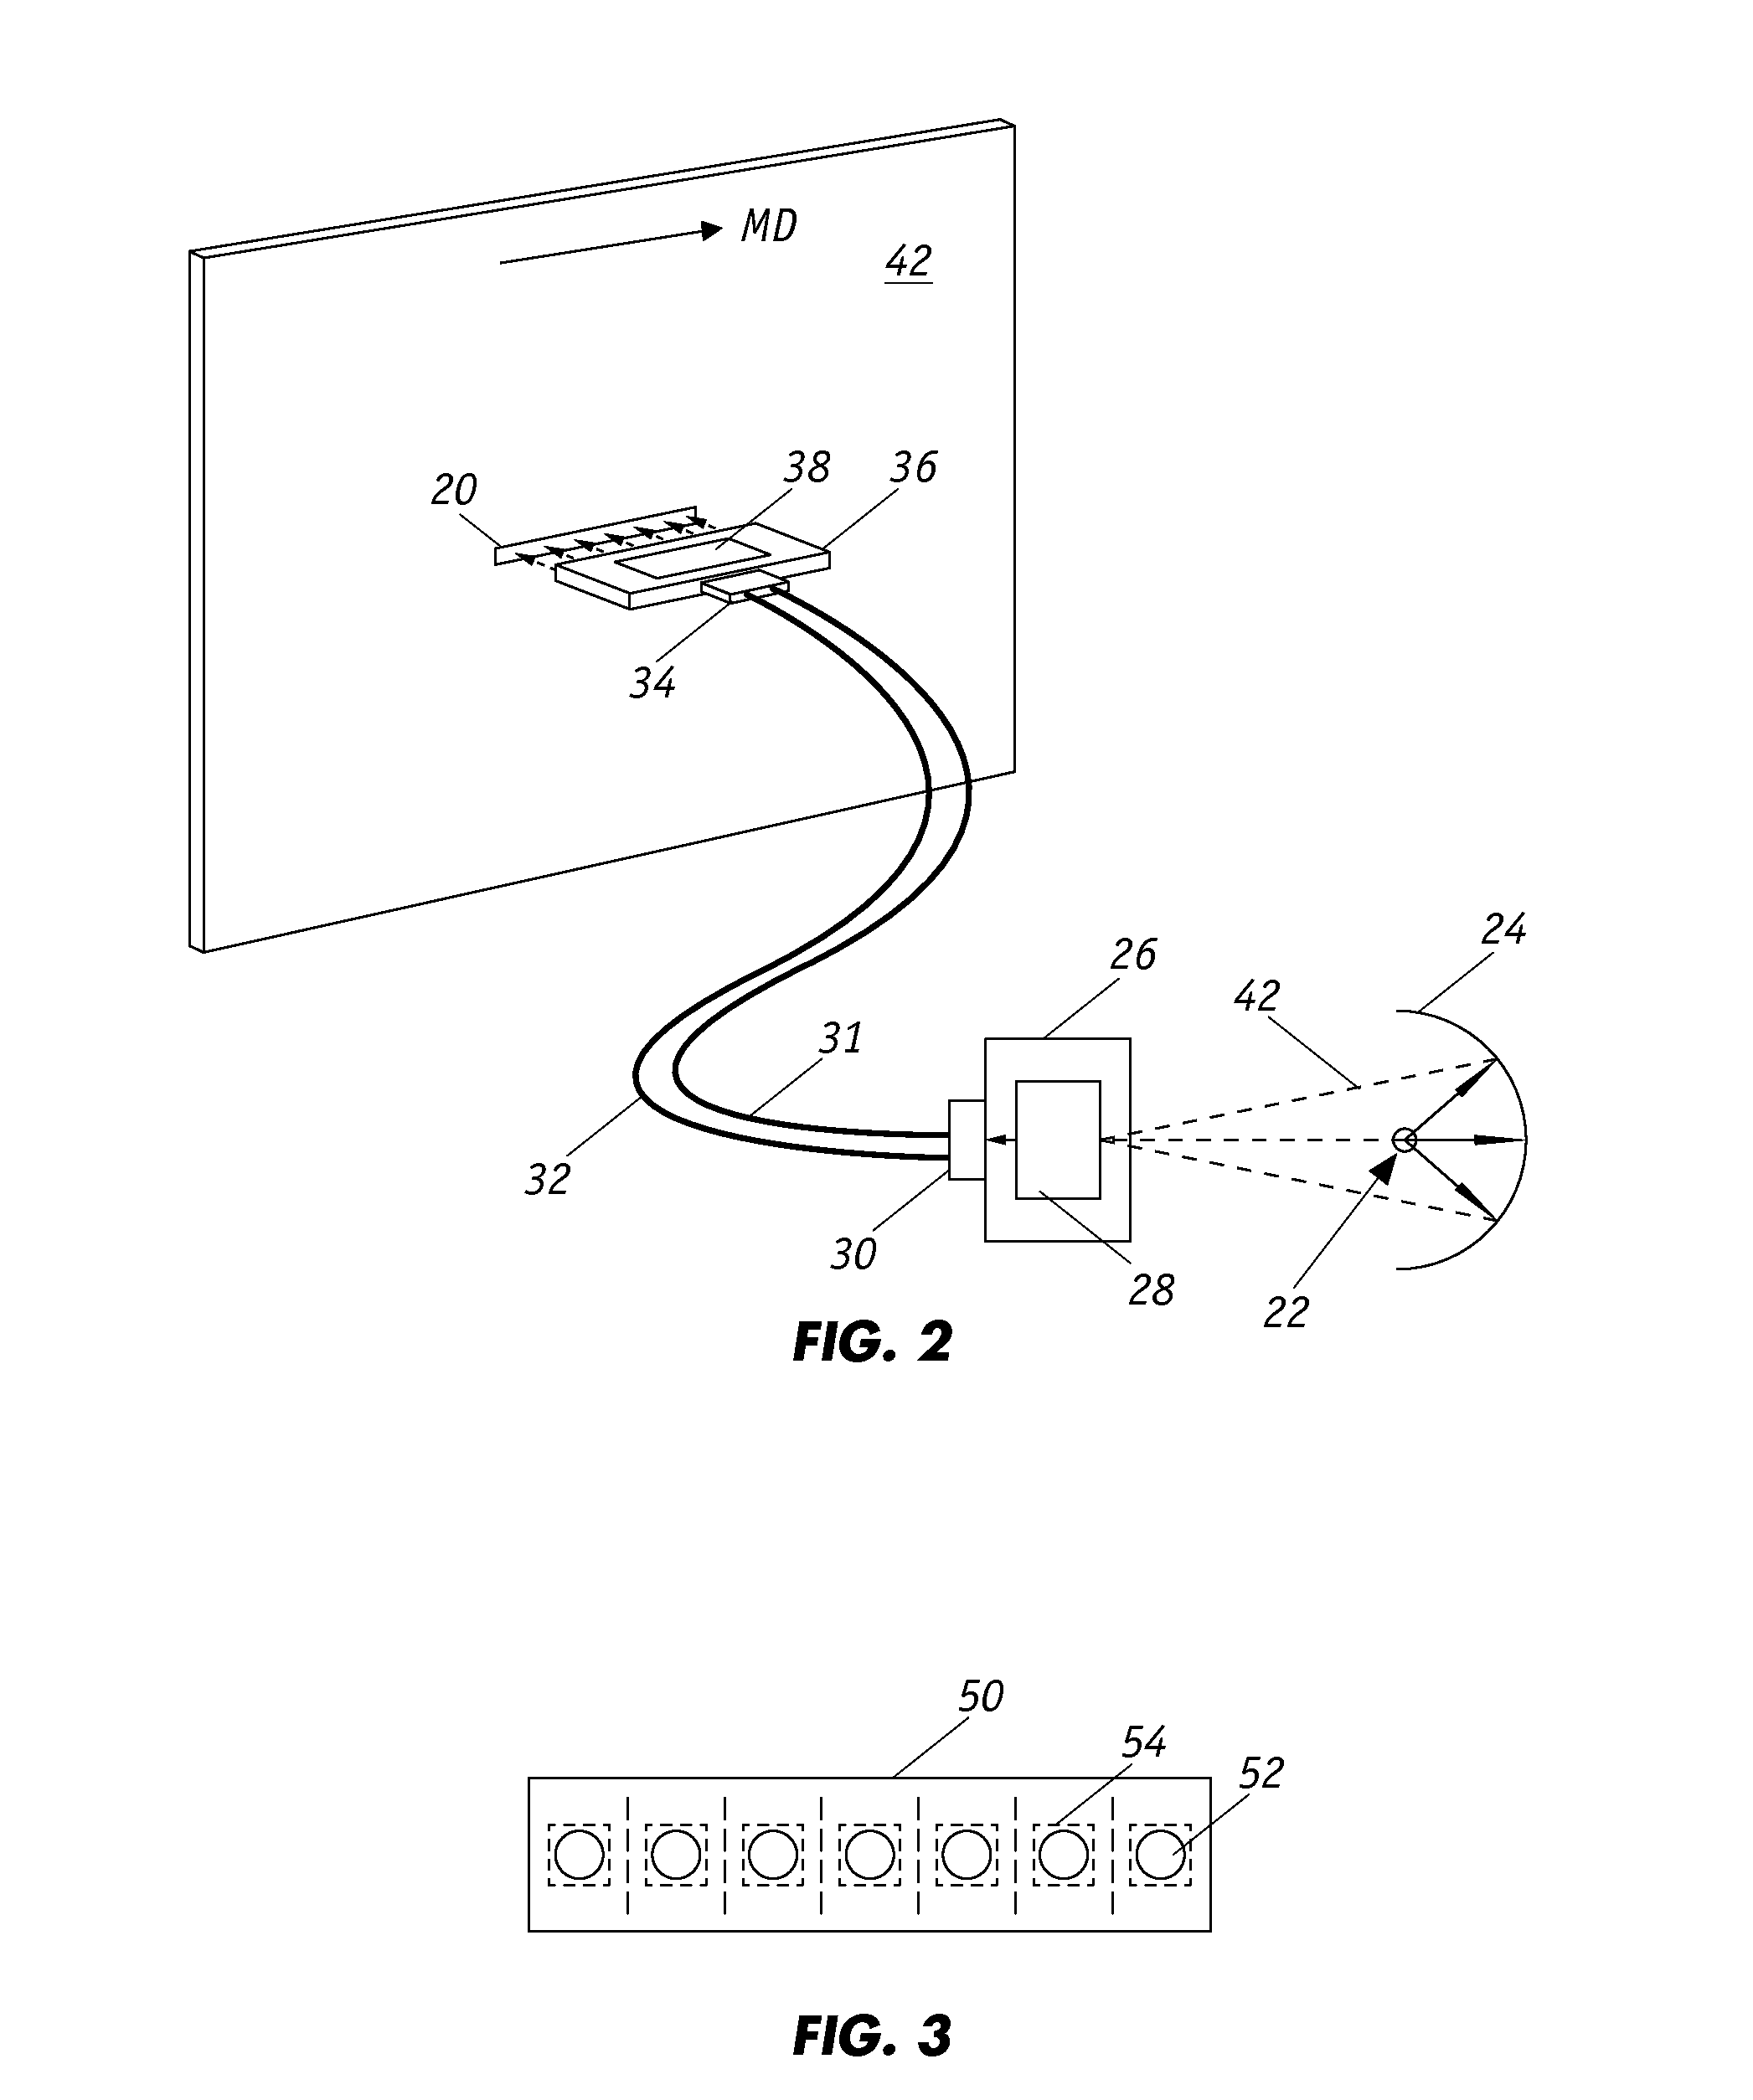 Optimized Spatial Resolution for a Spectroscopic Sensor